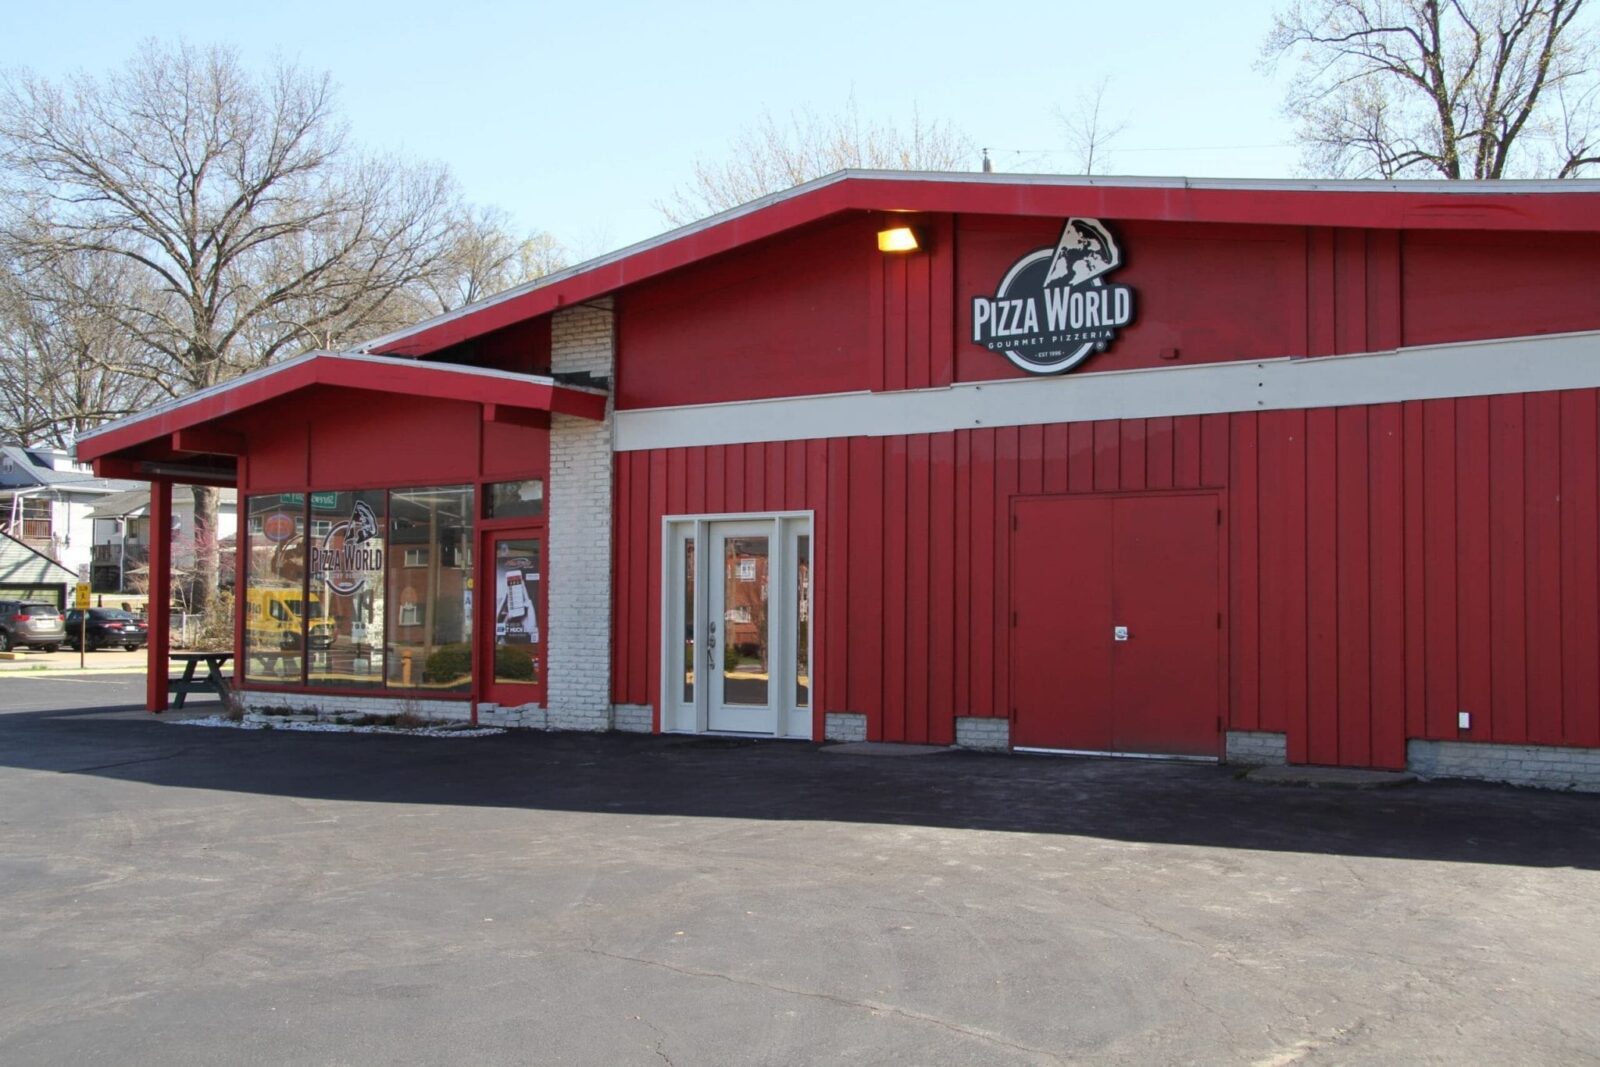 Pizza World in Shrewsbury is highly rated by customers and hiring